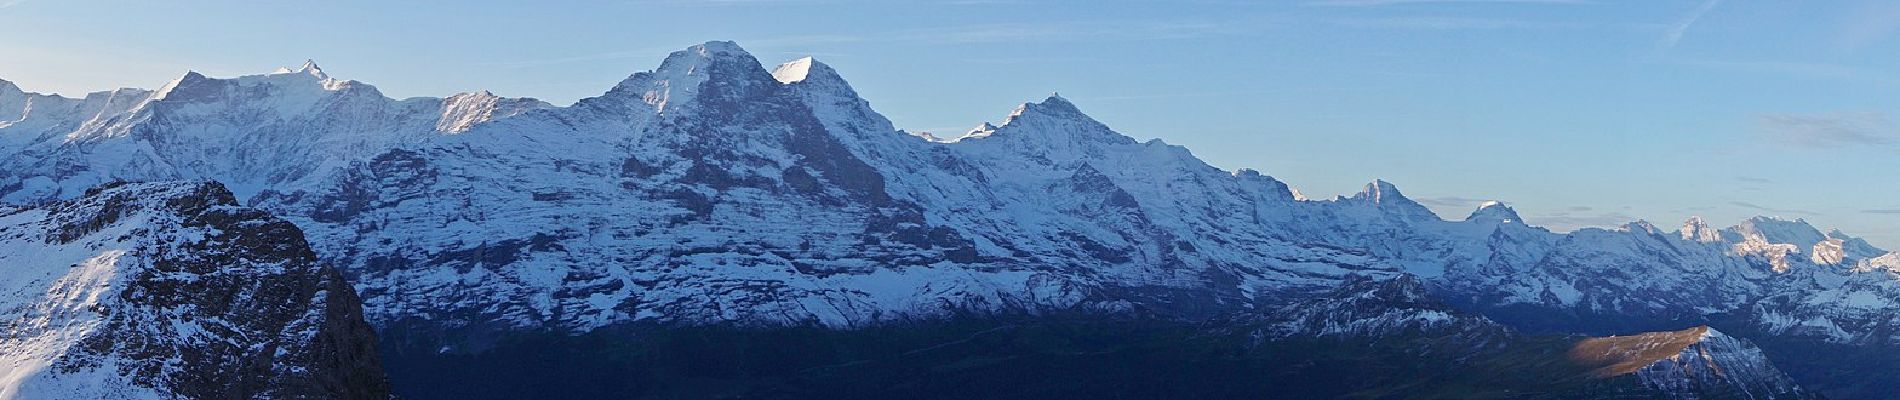 Tocht Te voet Grindelwald - First - Bachalpsee - Fauhlhorn - Schynige Platte - Photo